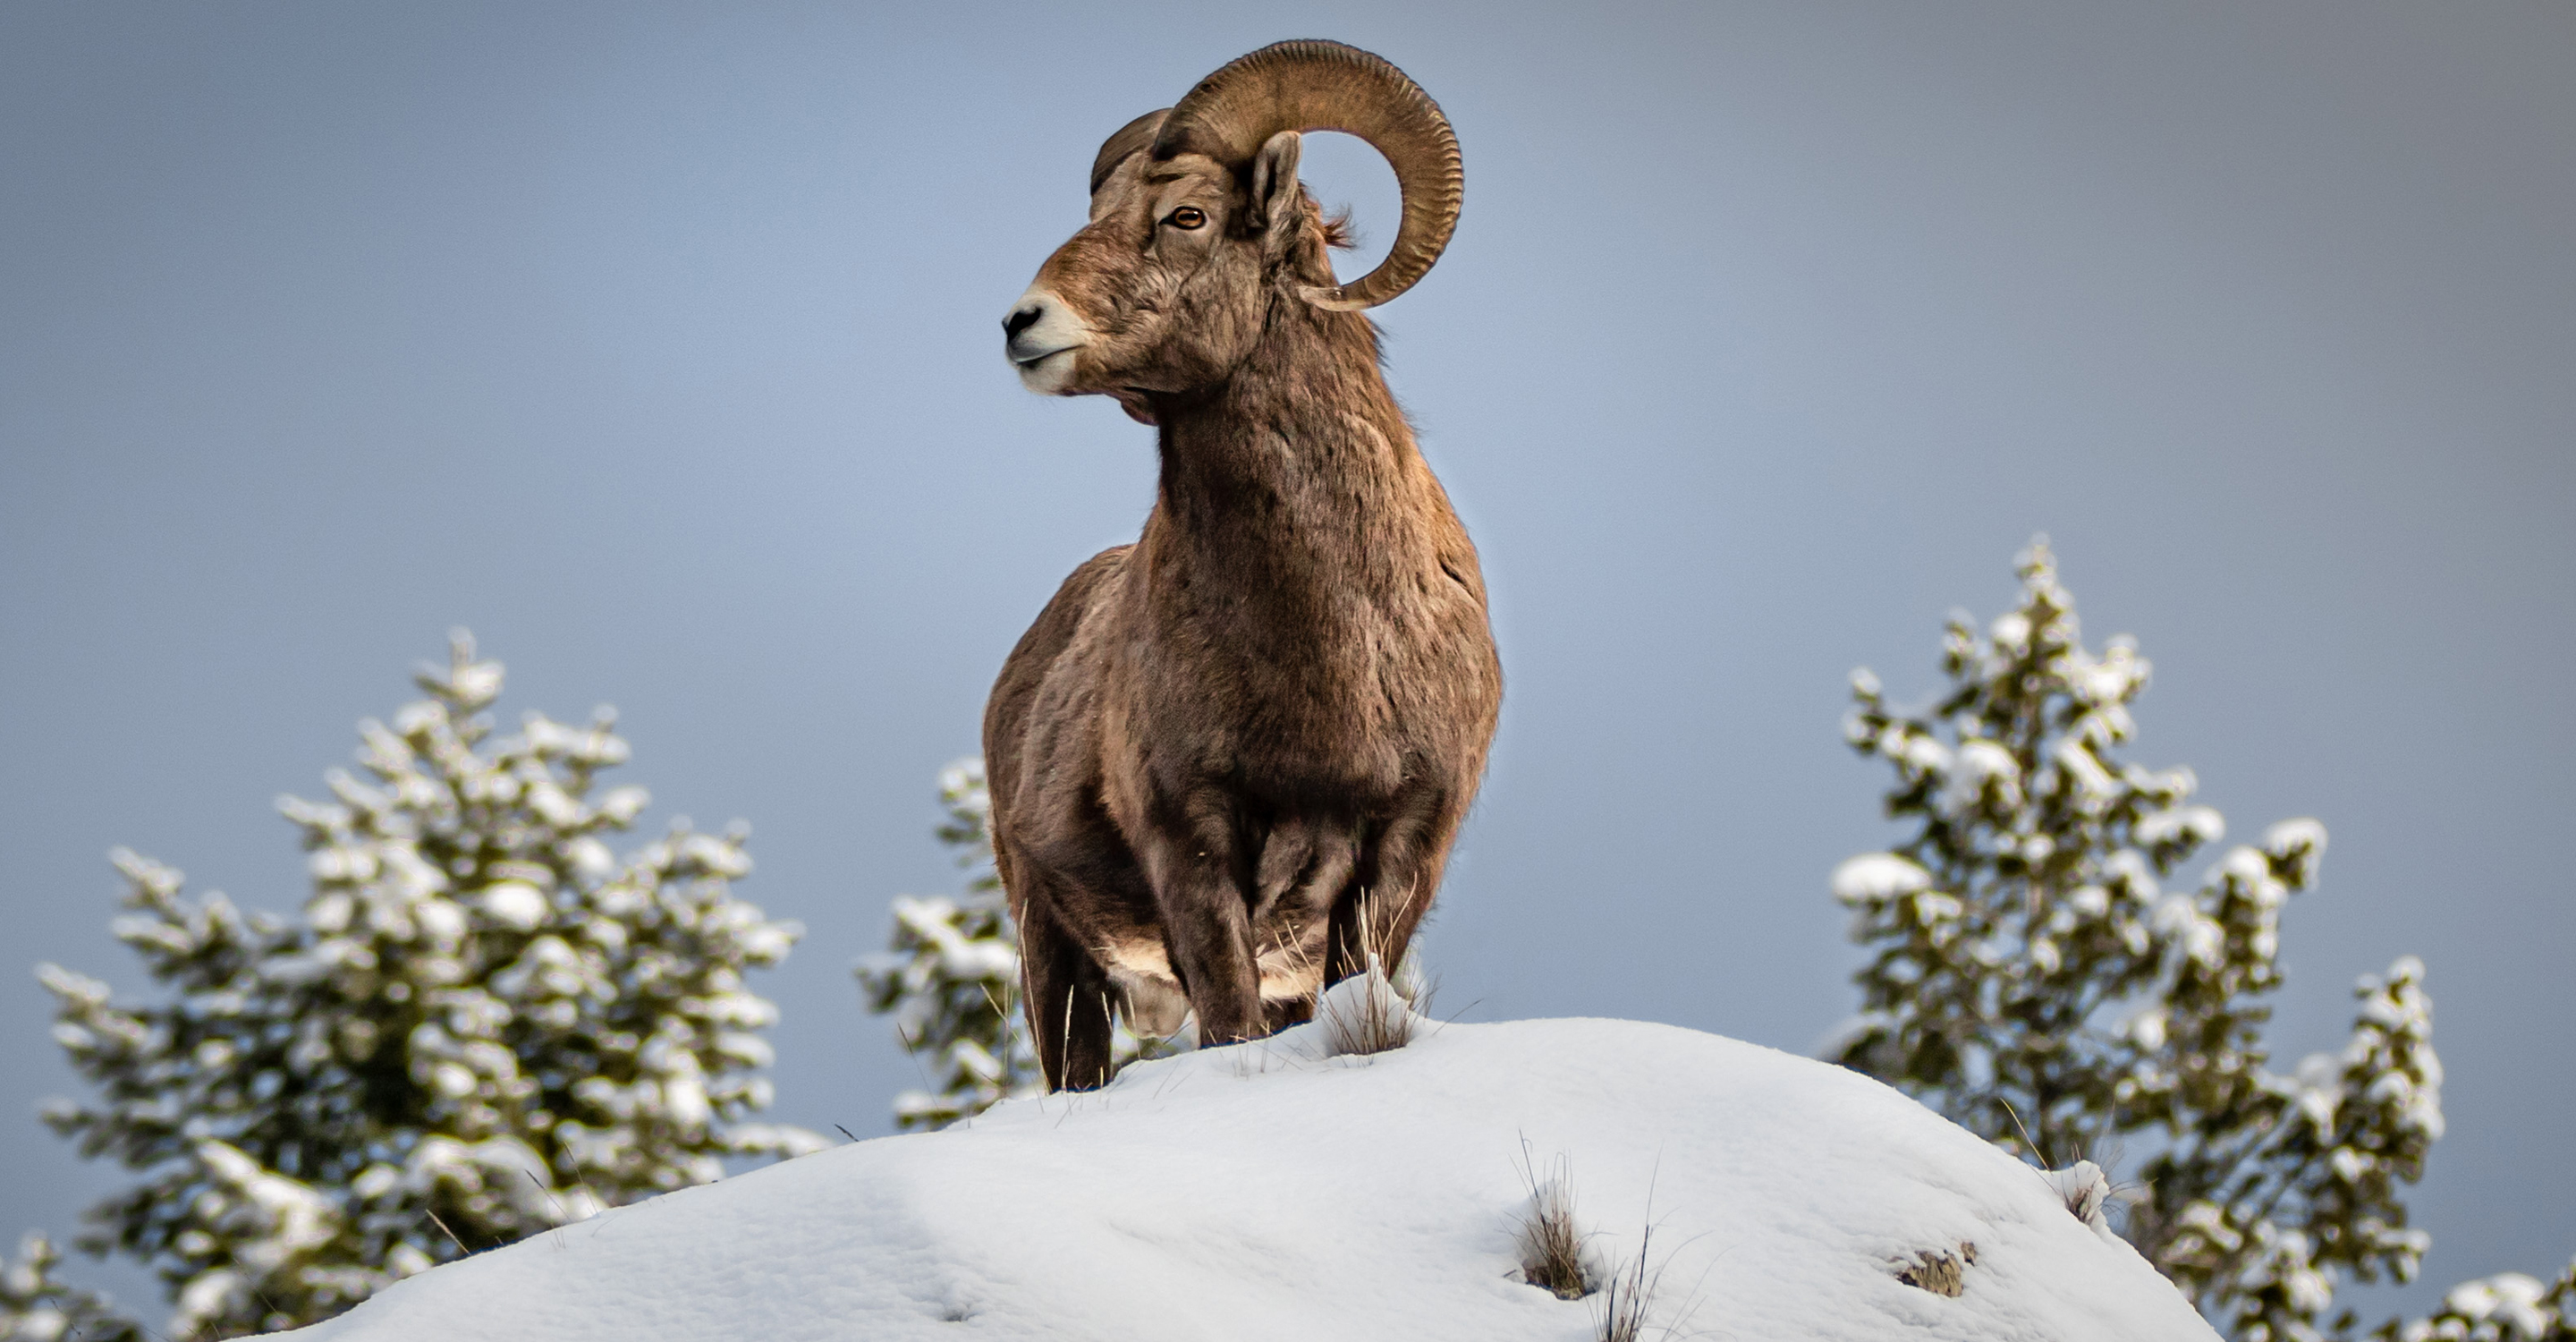 A bighorn sheep stands on a snowy hilltop in Yellowstone National Park, United States